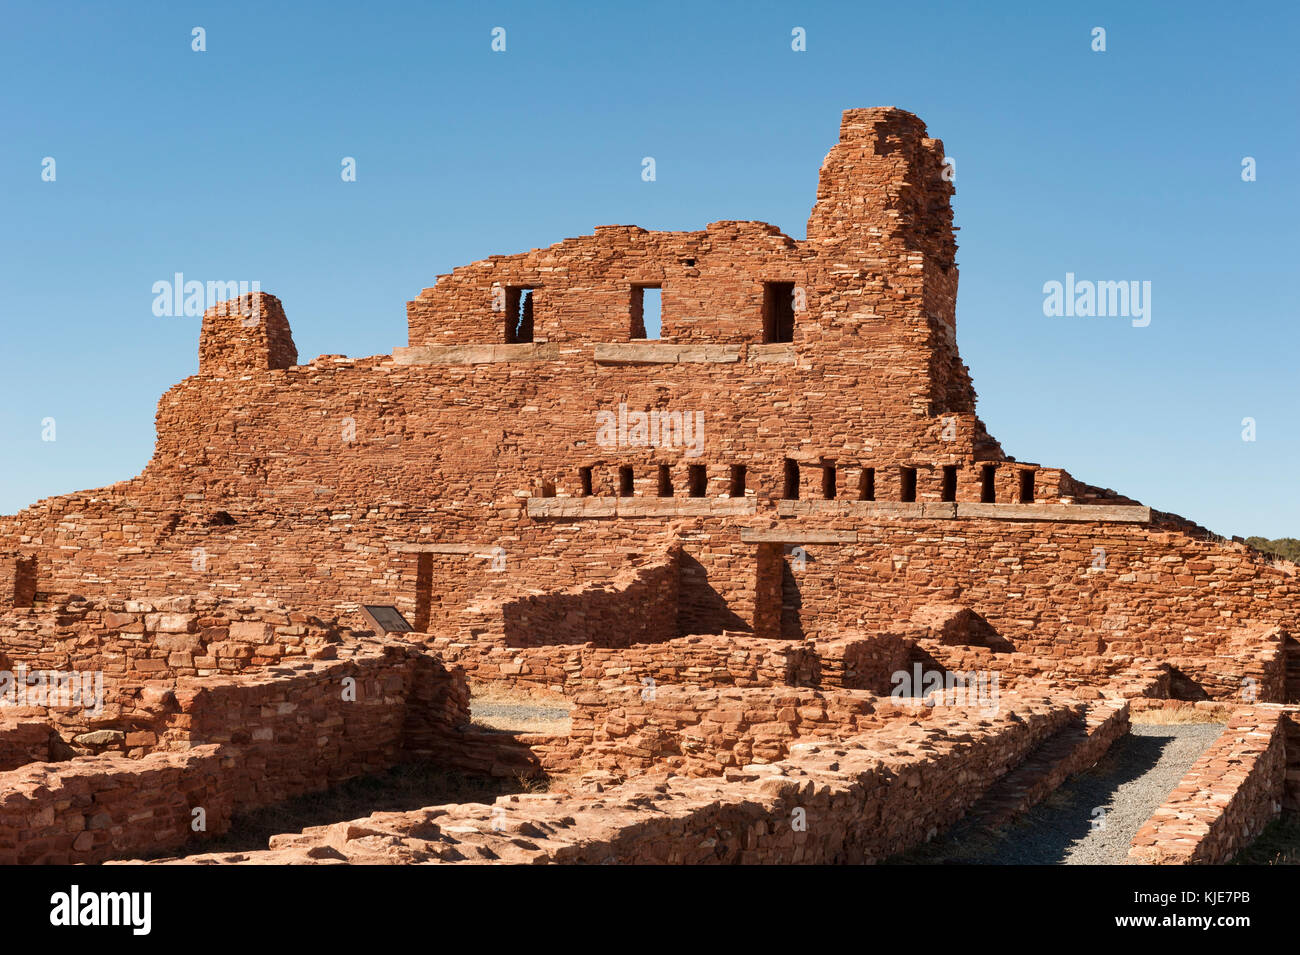 Mission San Gregorio de Abo ruins, Salinas Pueblo Missions National Monument, New Mexico, NM, United States of America, USA. Stock Photo